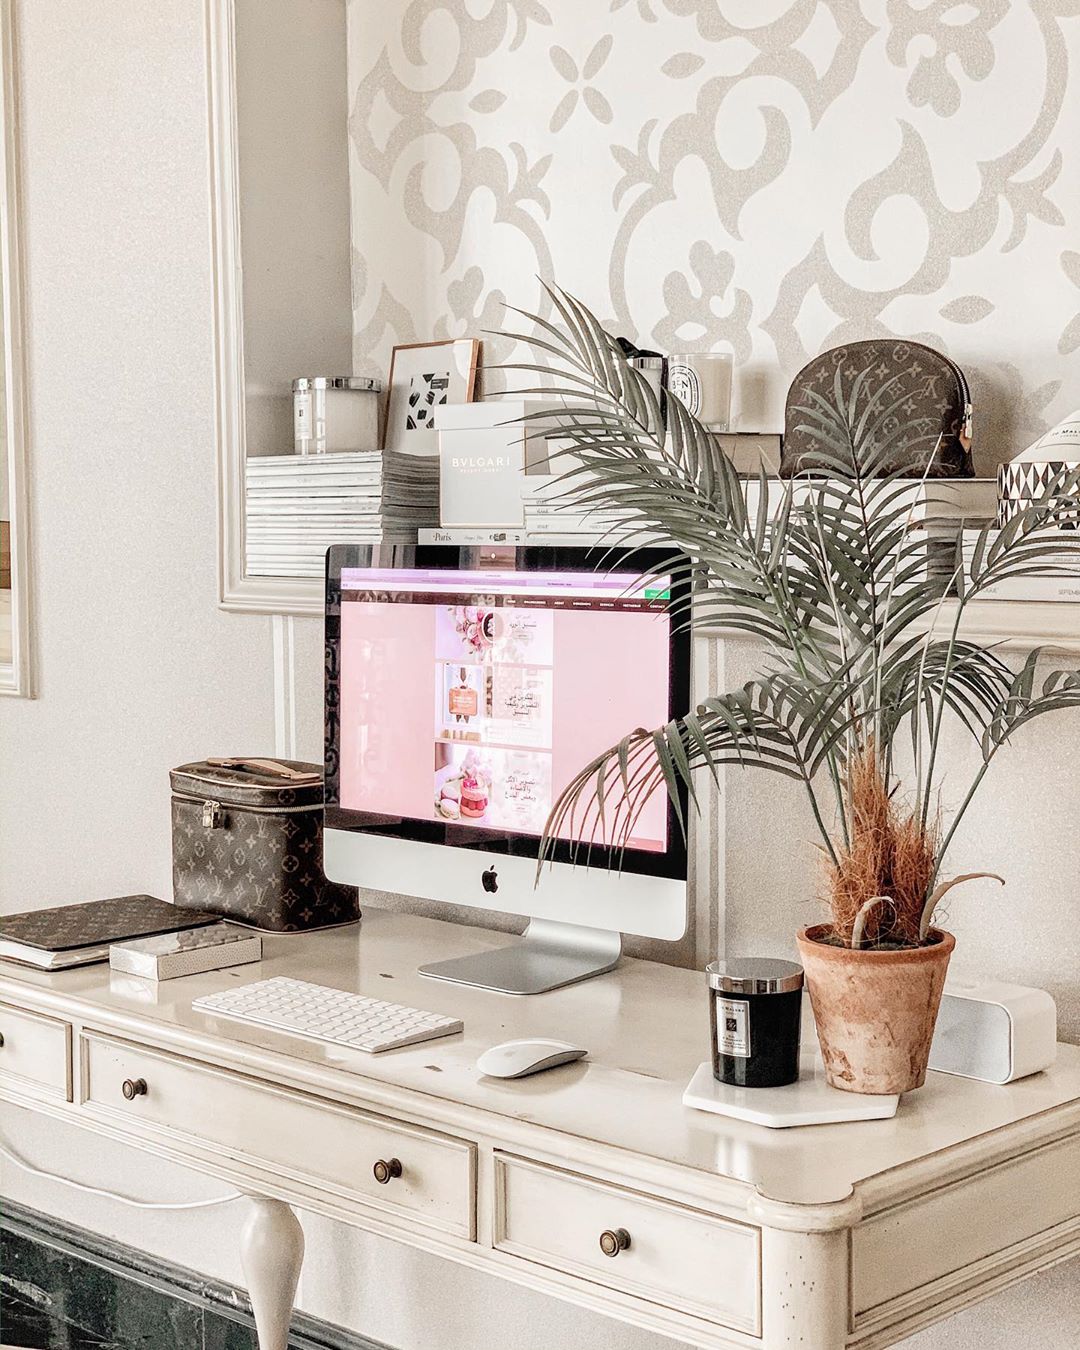 small home desk with iMac and small plant on desktop photo by Instagram user @fatmahilal7